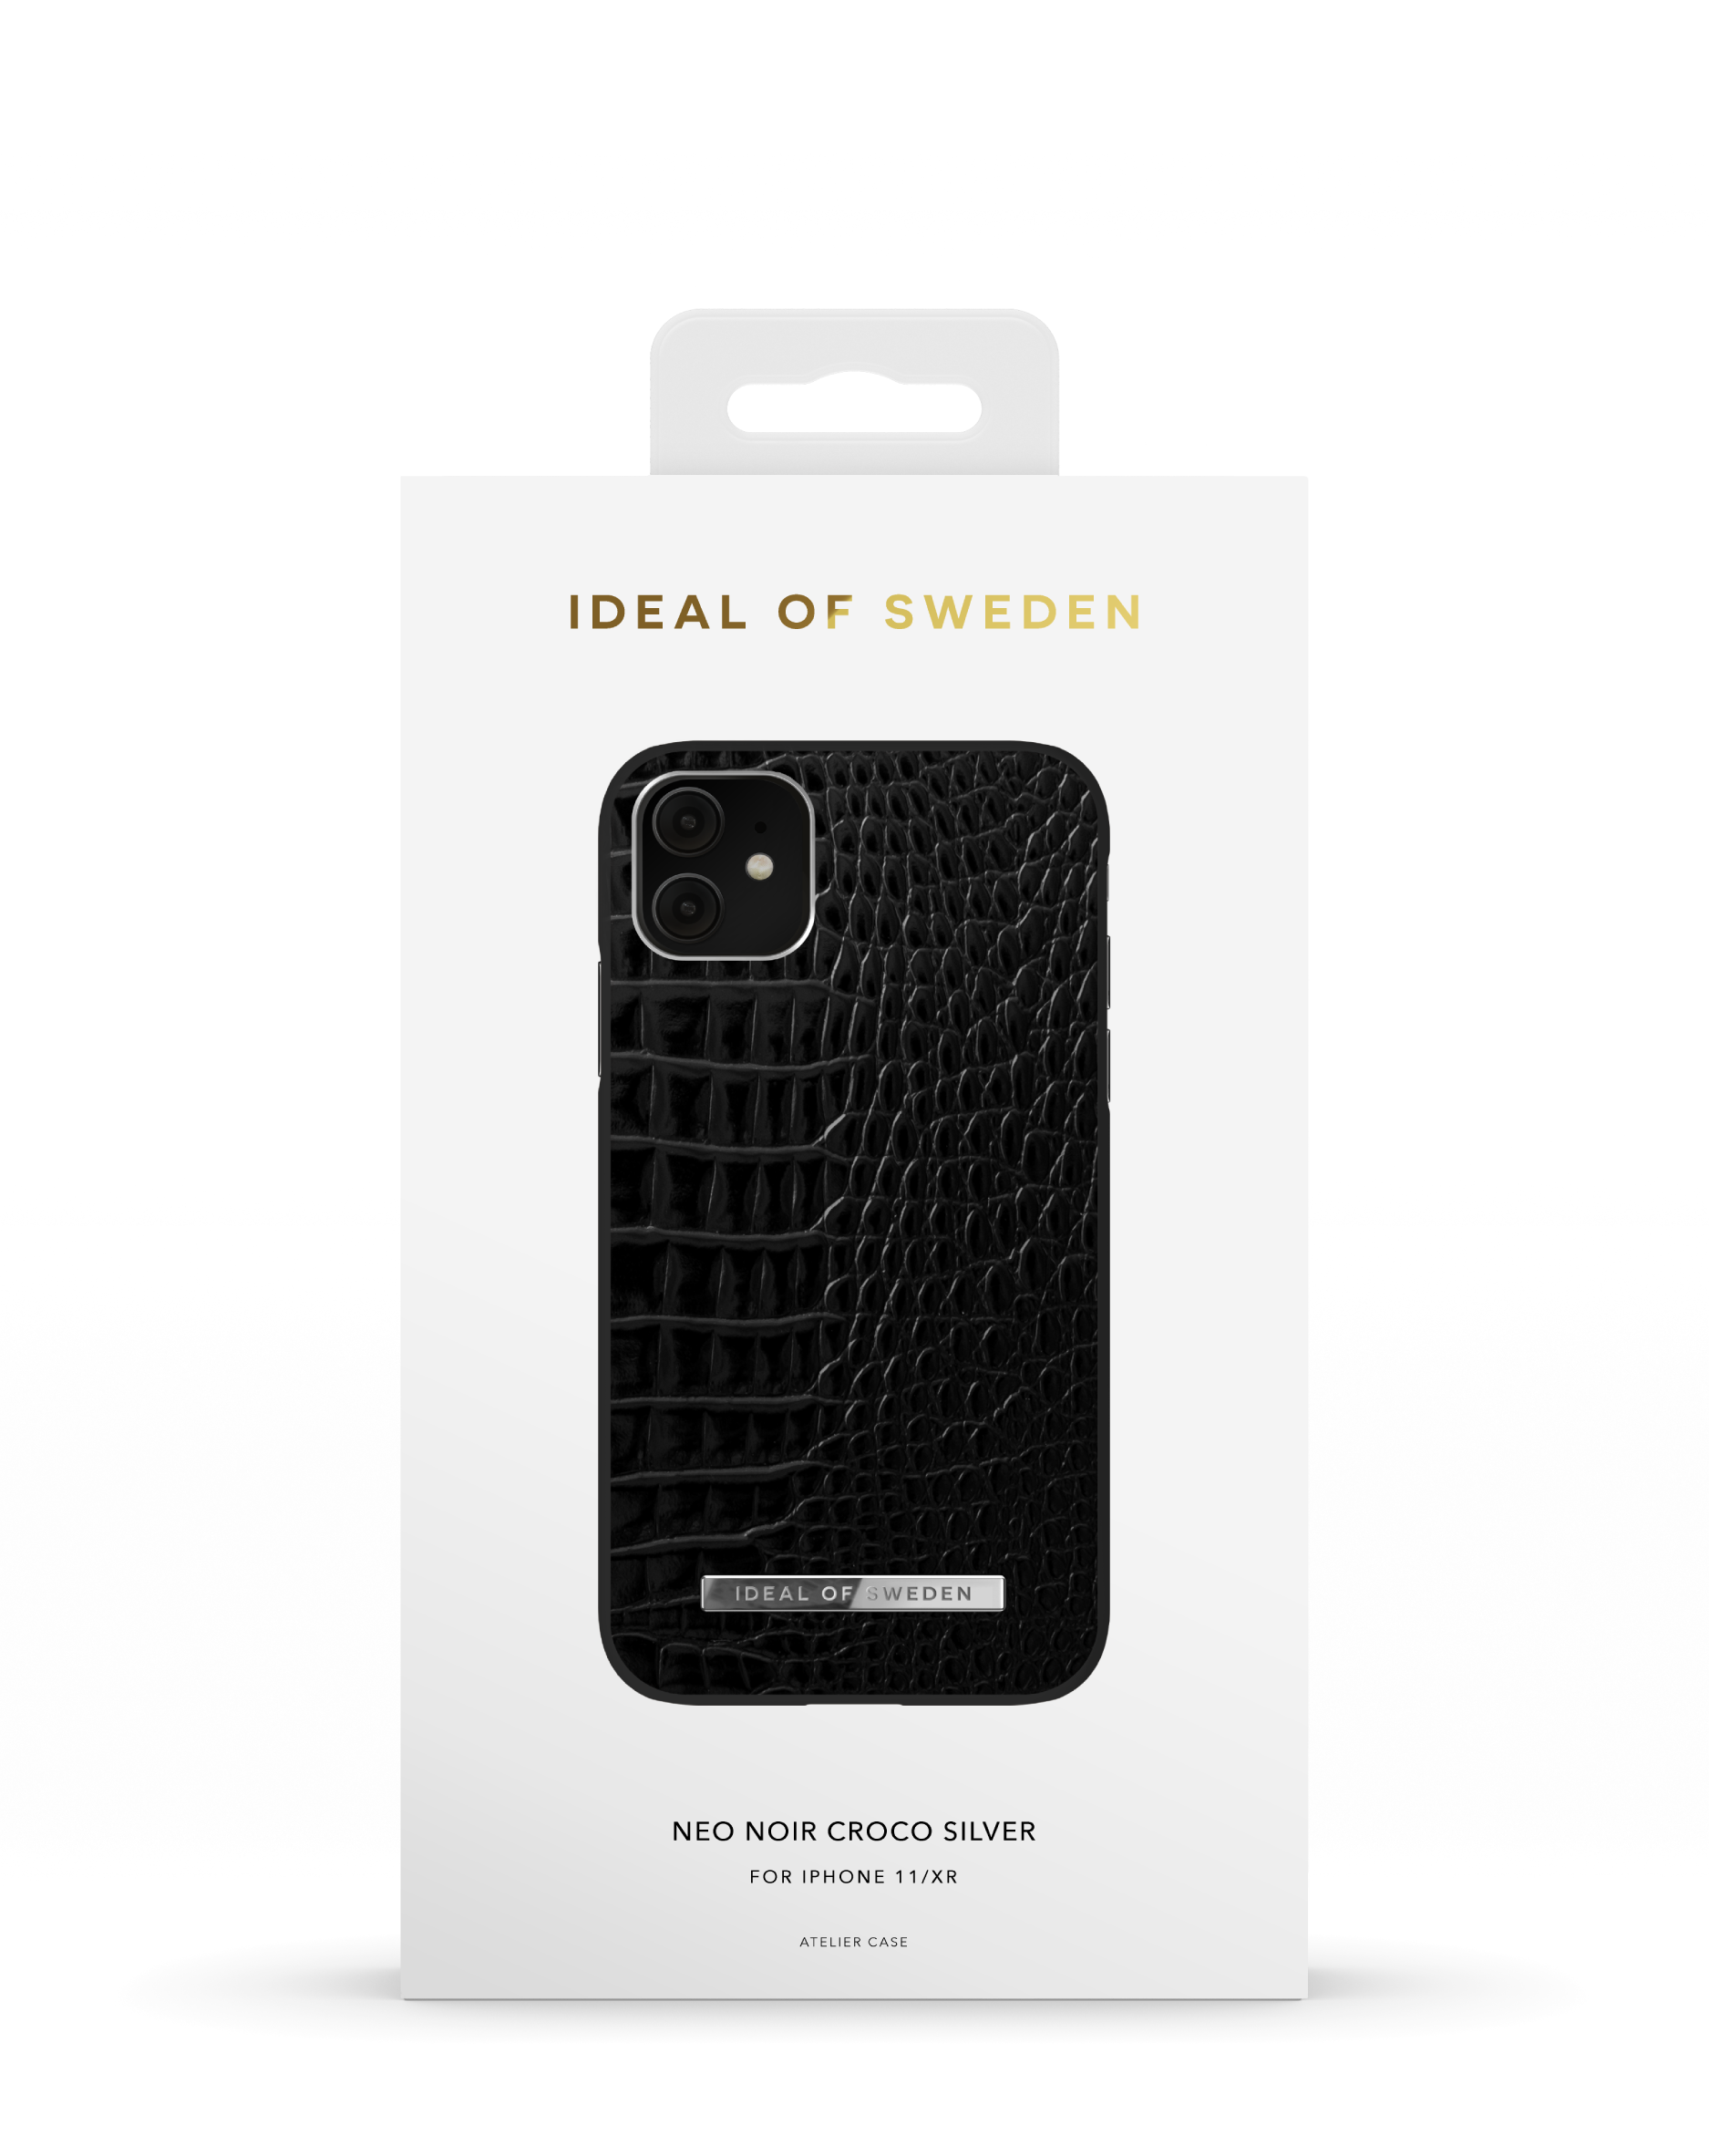 IDEAL OF iPhone 11, Croco Neo Backcover, iPhone Apple XR, Silver Apple, Apple SWEDEN Noir IDACSS21-I1961-306